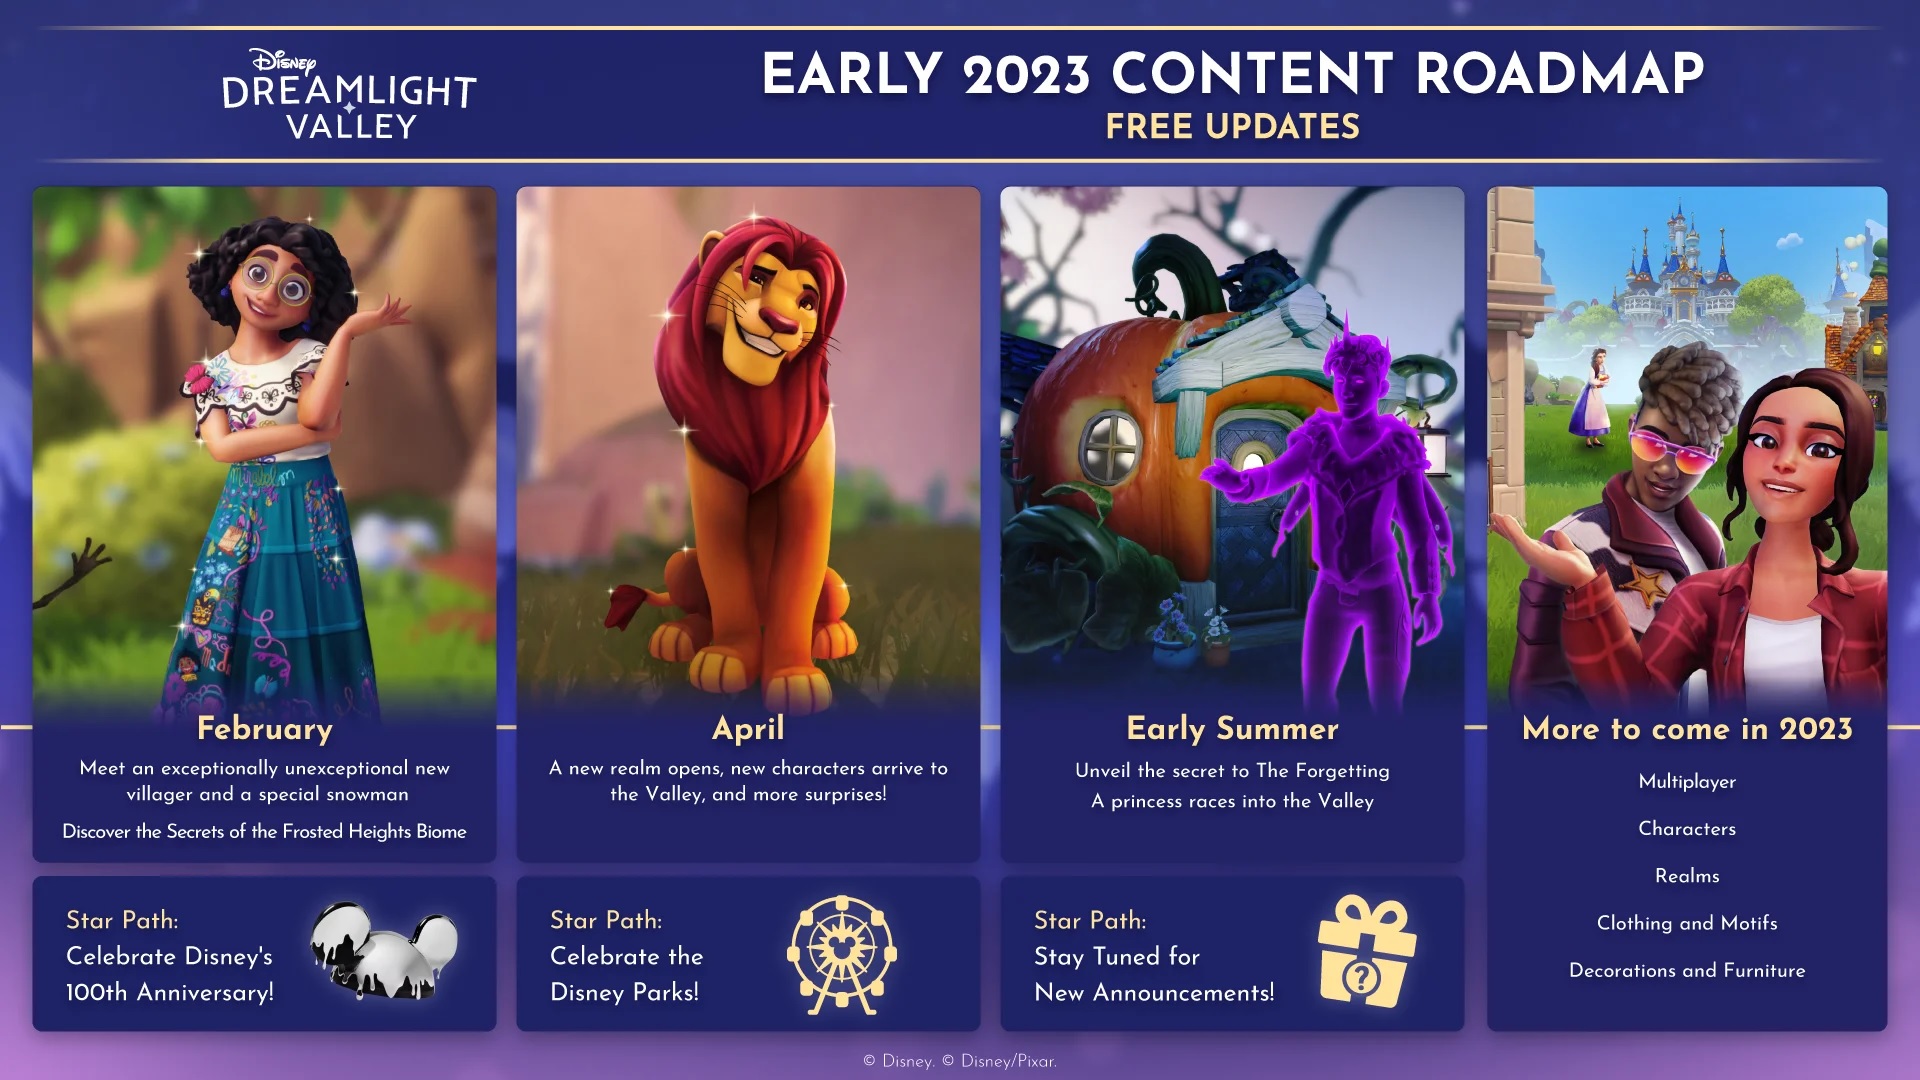 Official Disney Dreamlight Valley roadmap for 2023, including a February update with Mirabel, an April update with Simba, a summer update and multiplayer listed as 